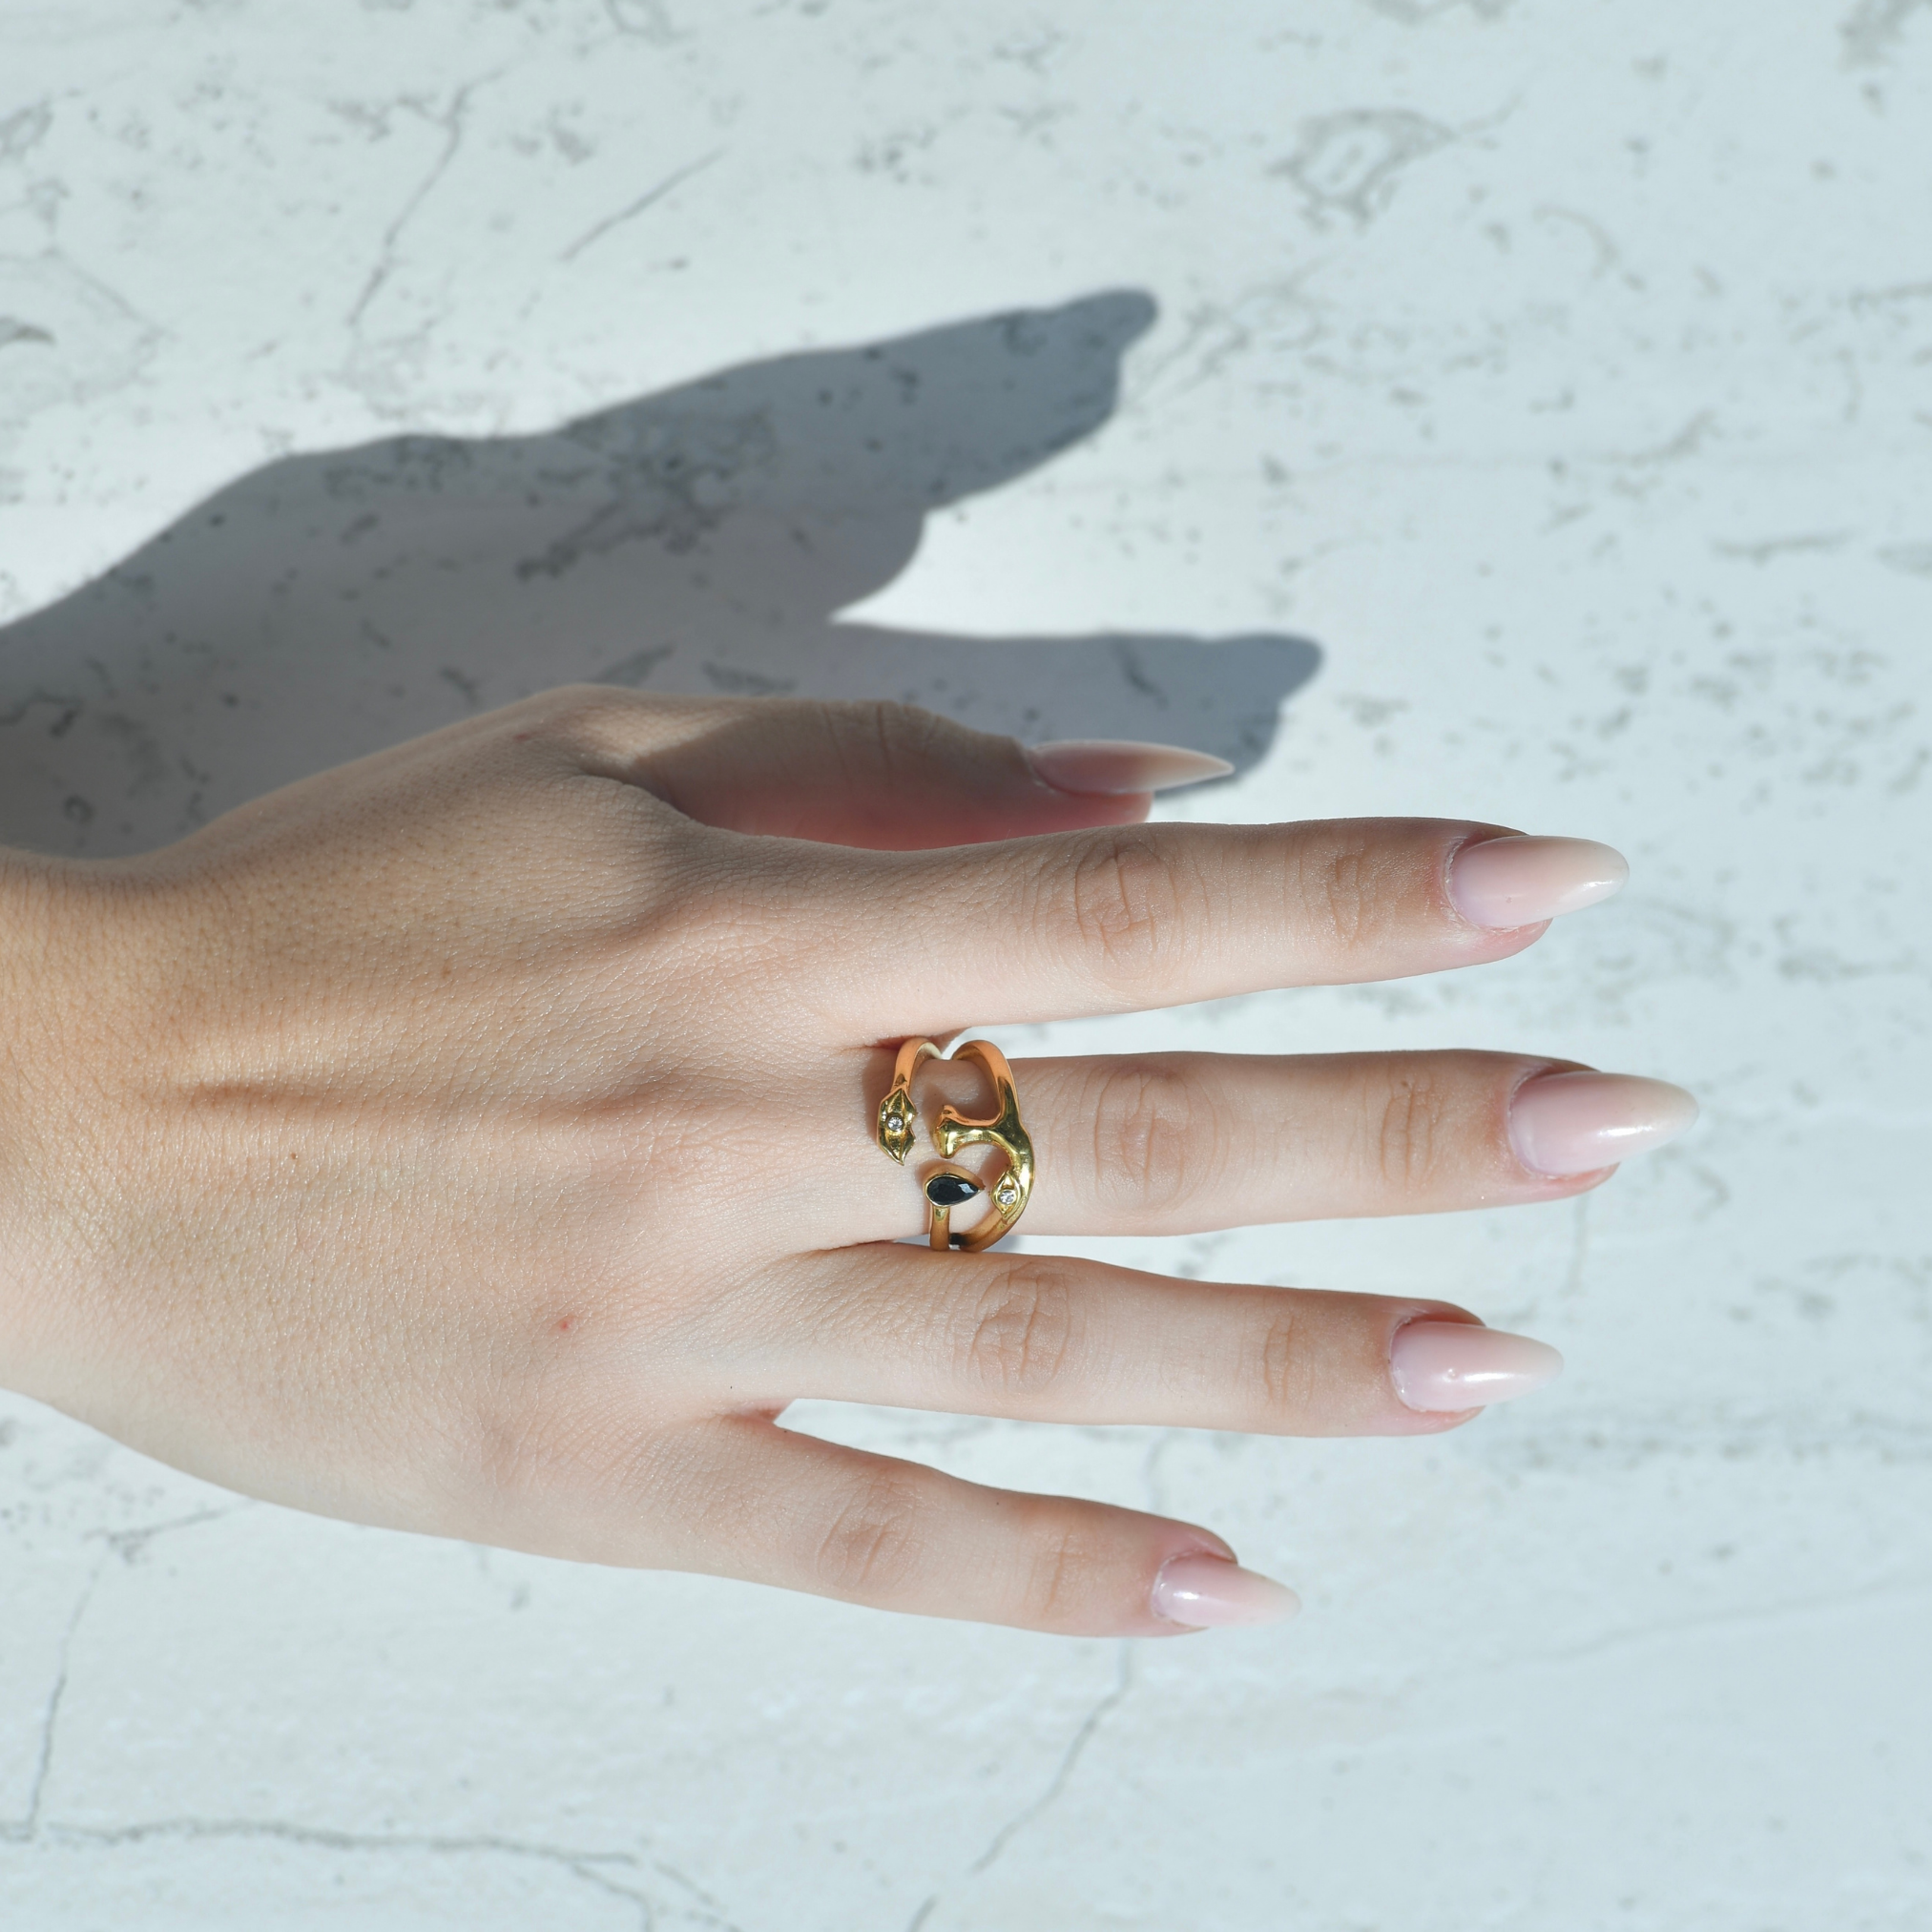 Her face gold zircon ring. Surreal gold ring with the shape of a face , eyes, noes, lips and a teardrop with a black zircon attached on the drop. In the lip and eye it has a small white zircon